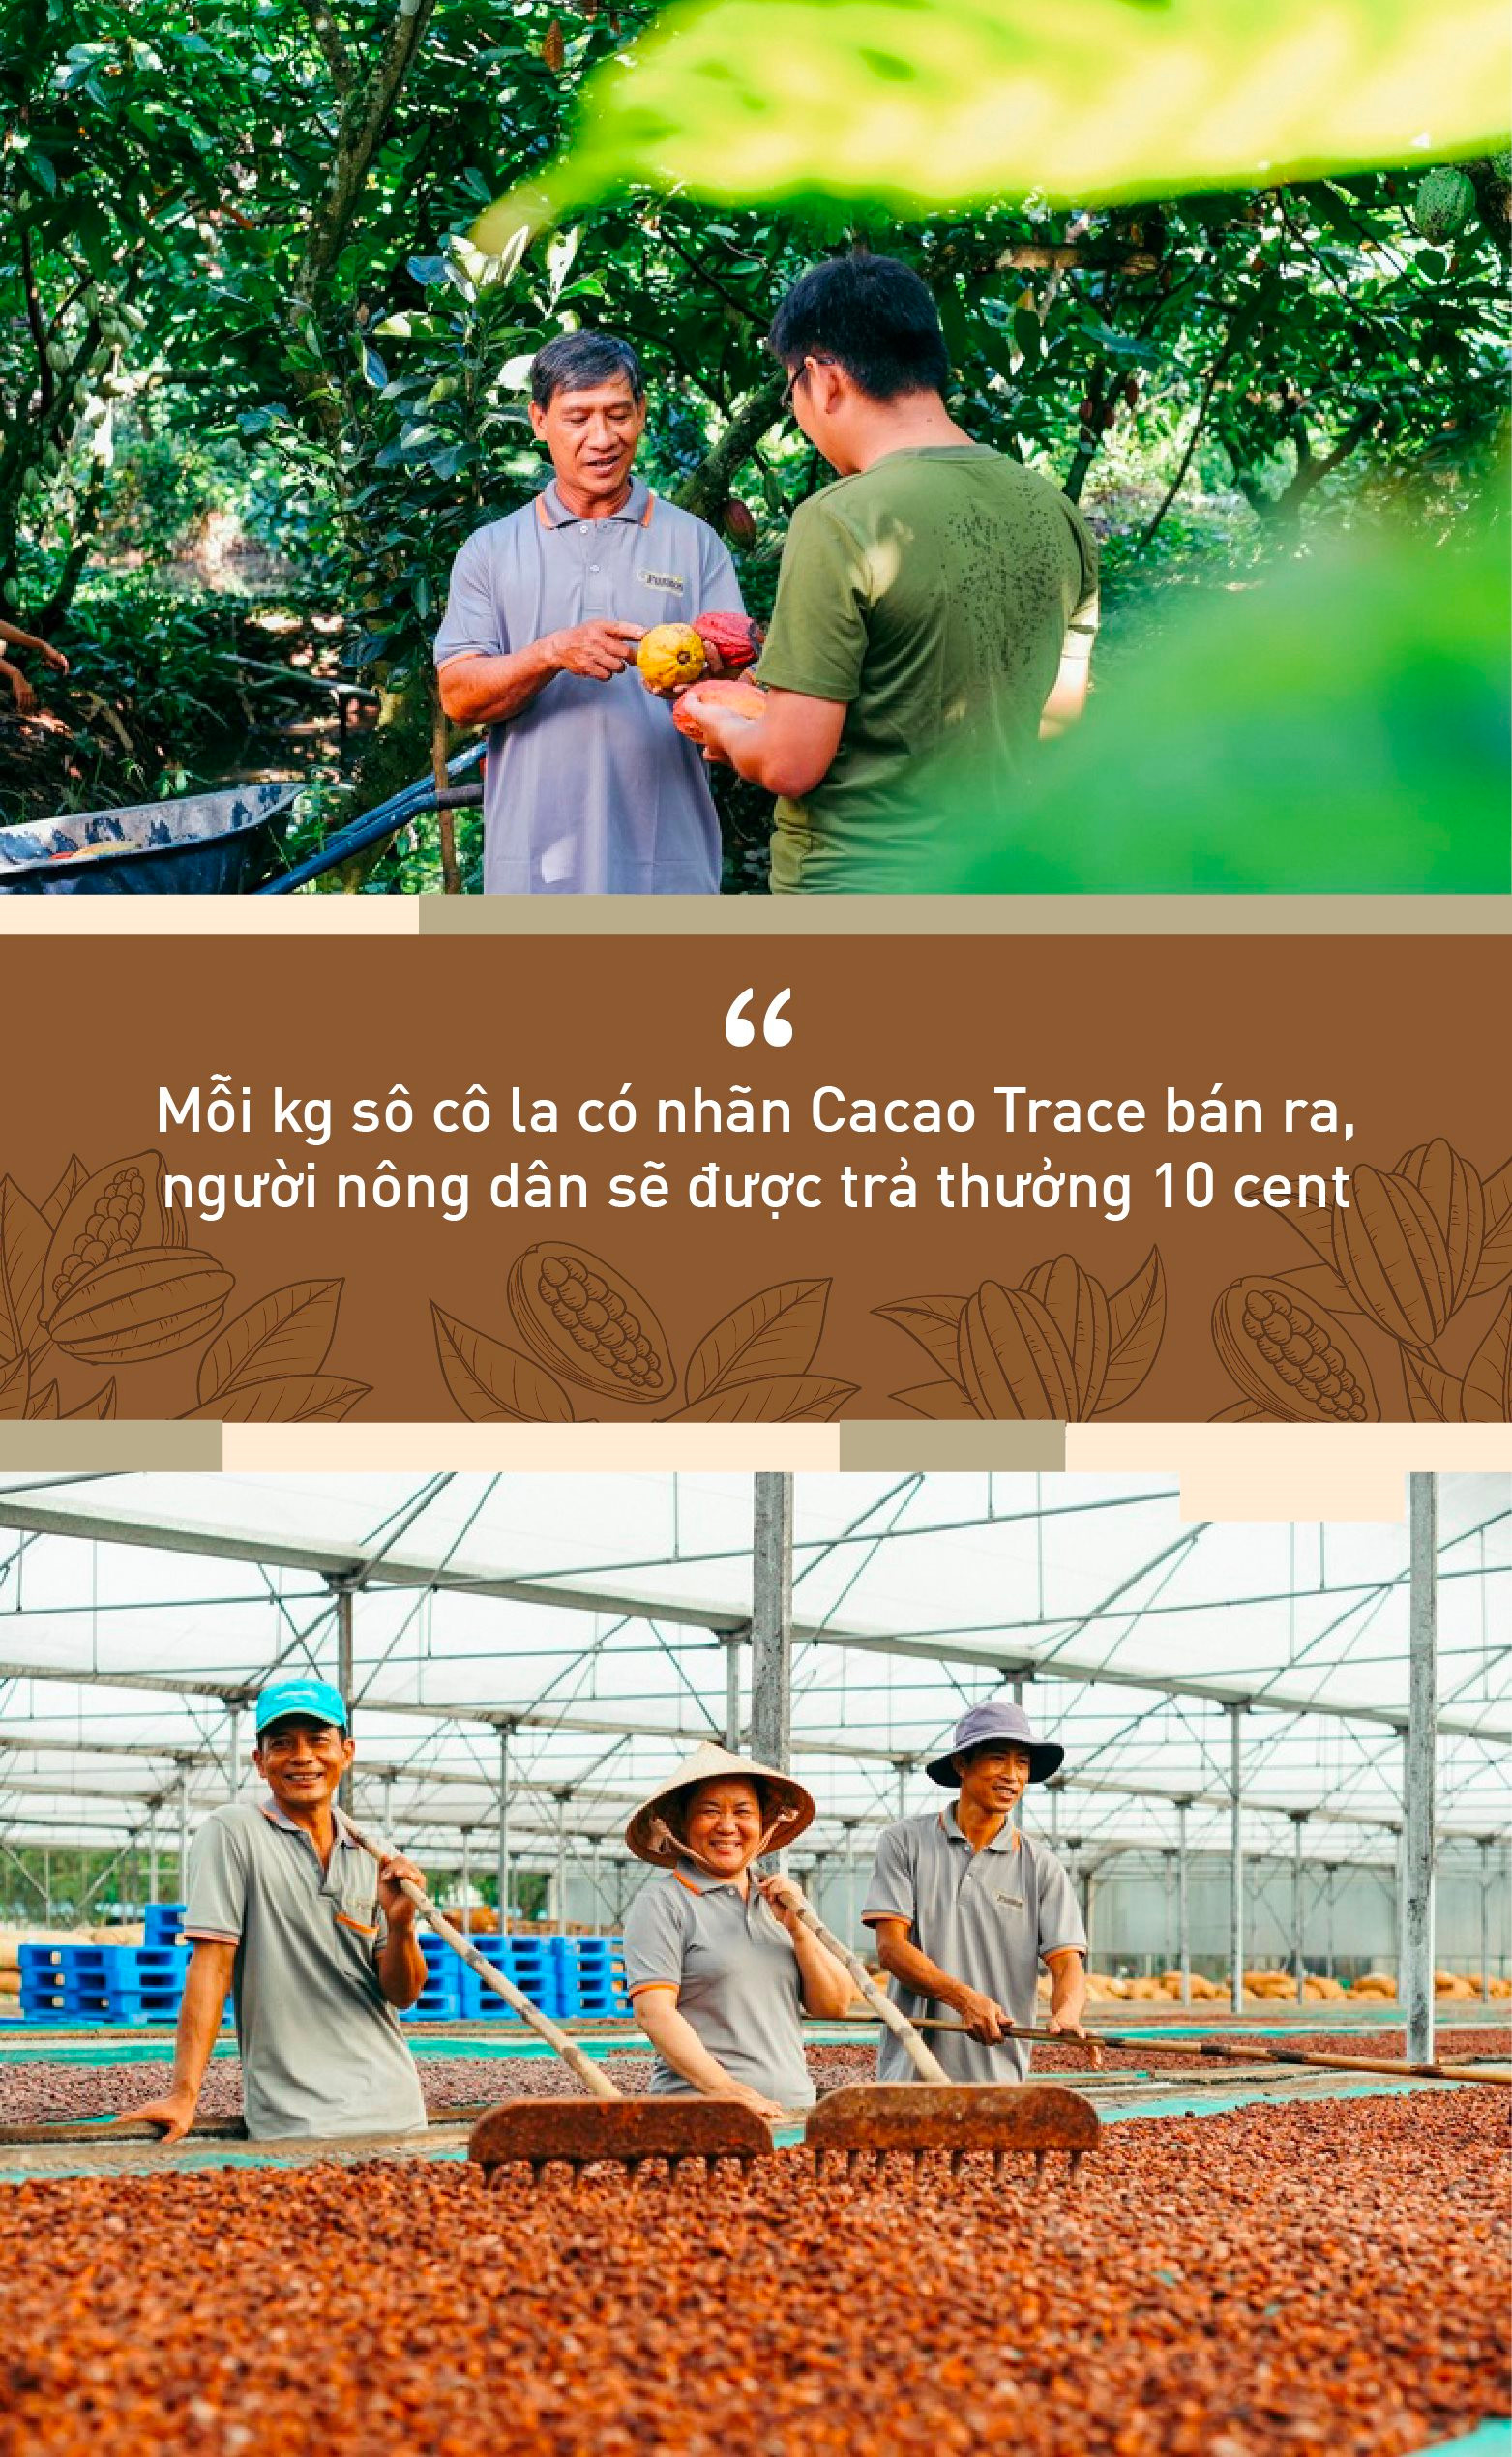 cacao-quote-1-03.jpg